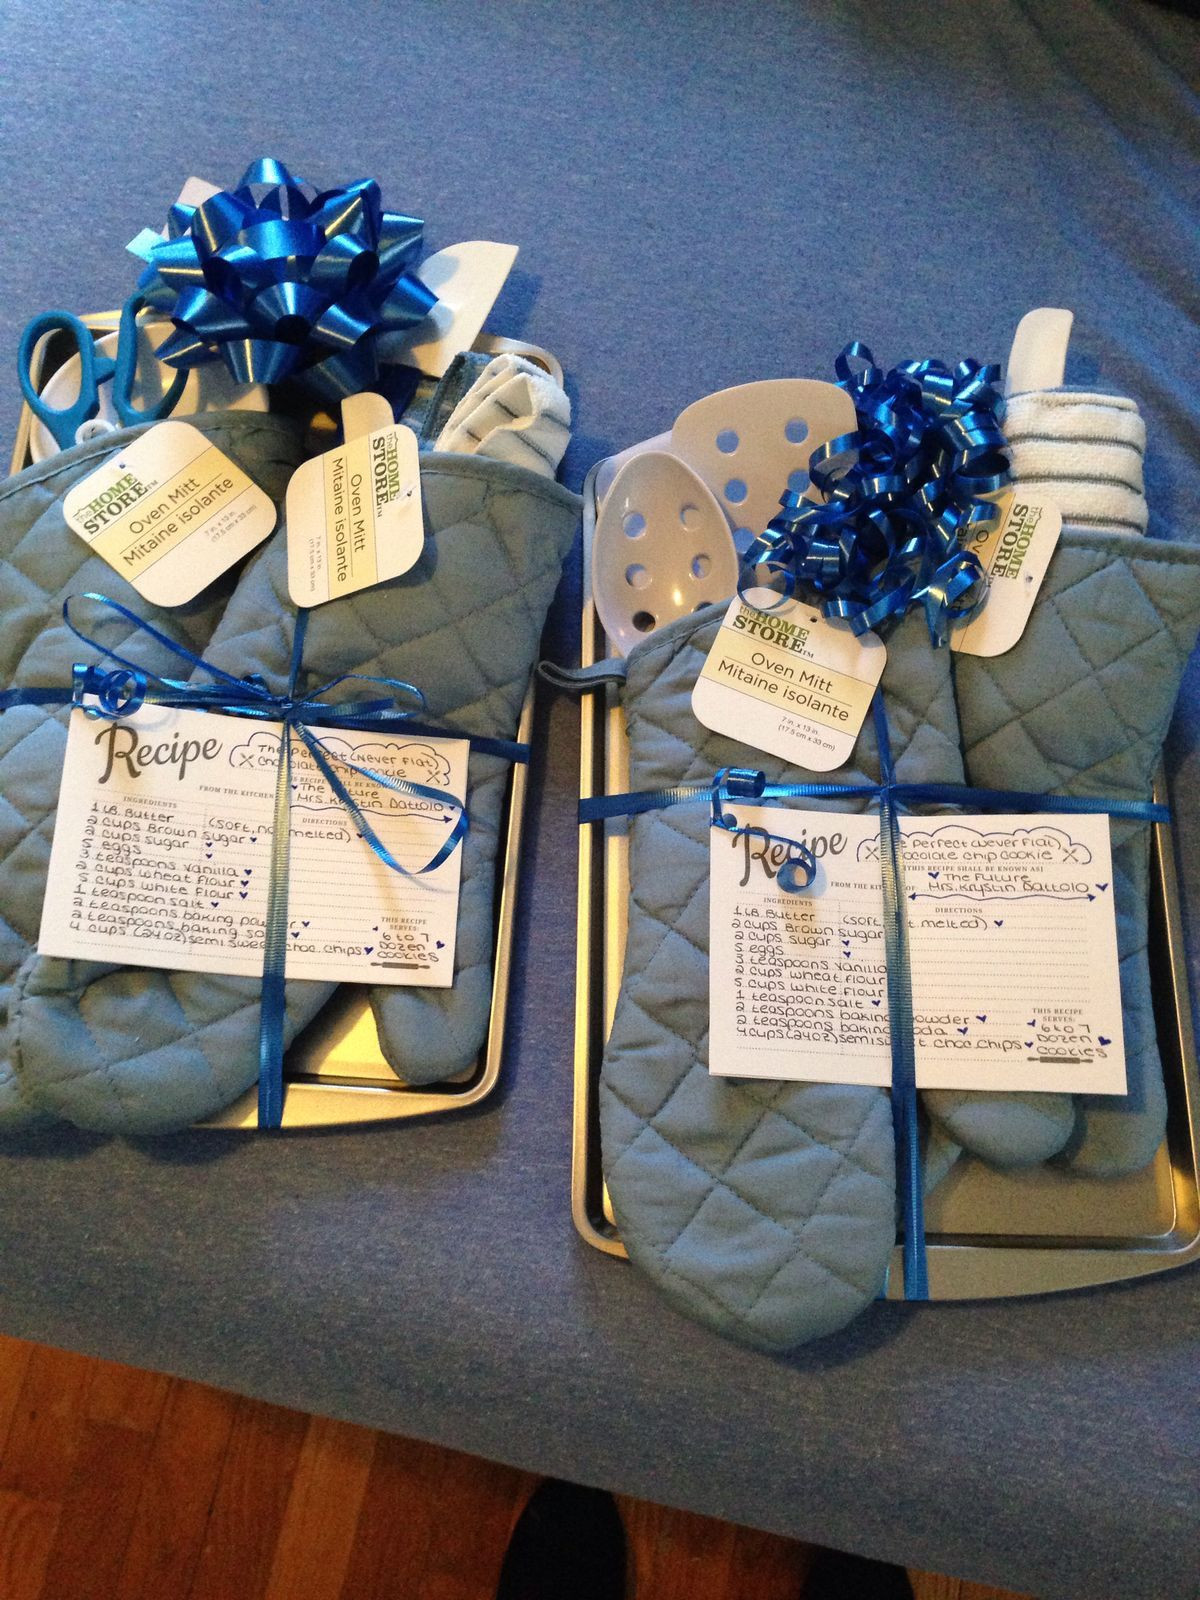 Baby Shower Door Prizes Gift Ideas
 2be01ae98a67c0545afcc d5069 1 200×1 600 pixels